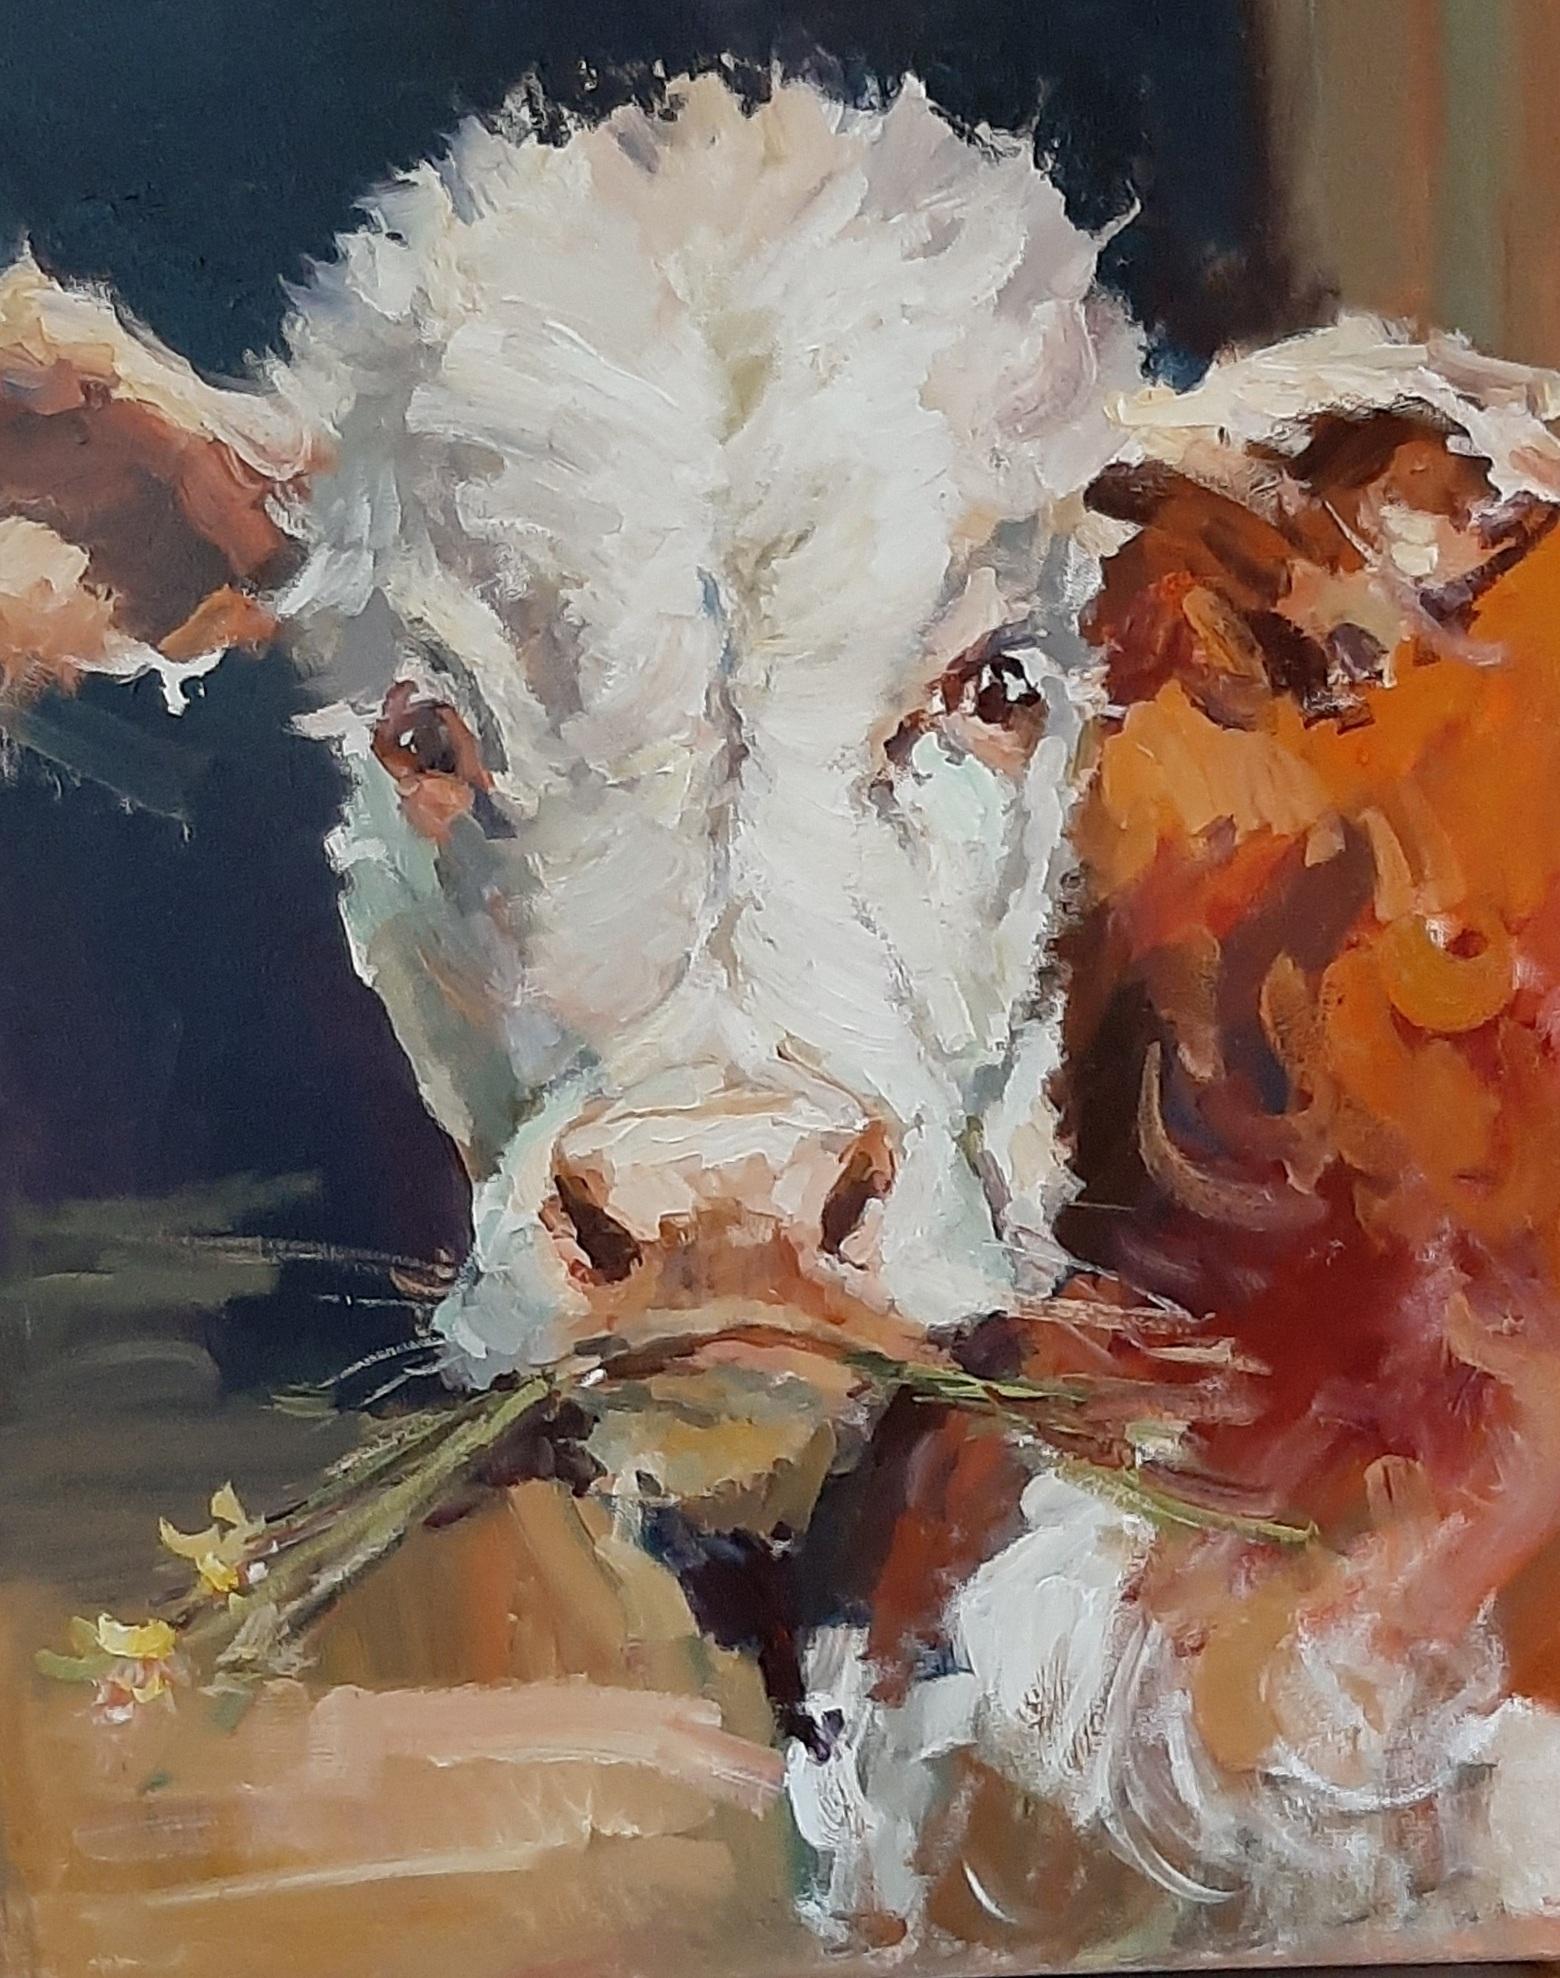 Max Skoblinsky Animal Painting - The Candid Calf: Flowers for Mom. Oil painting with Cow. Farm animal art